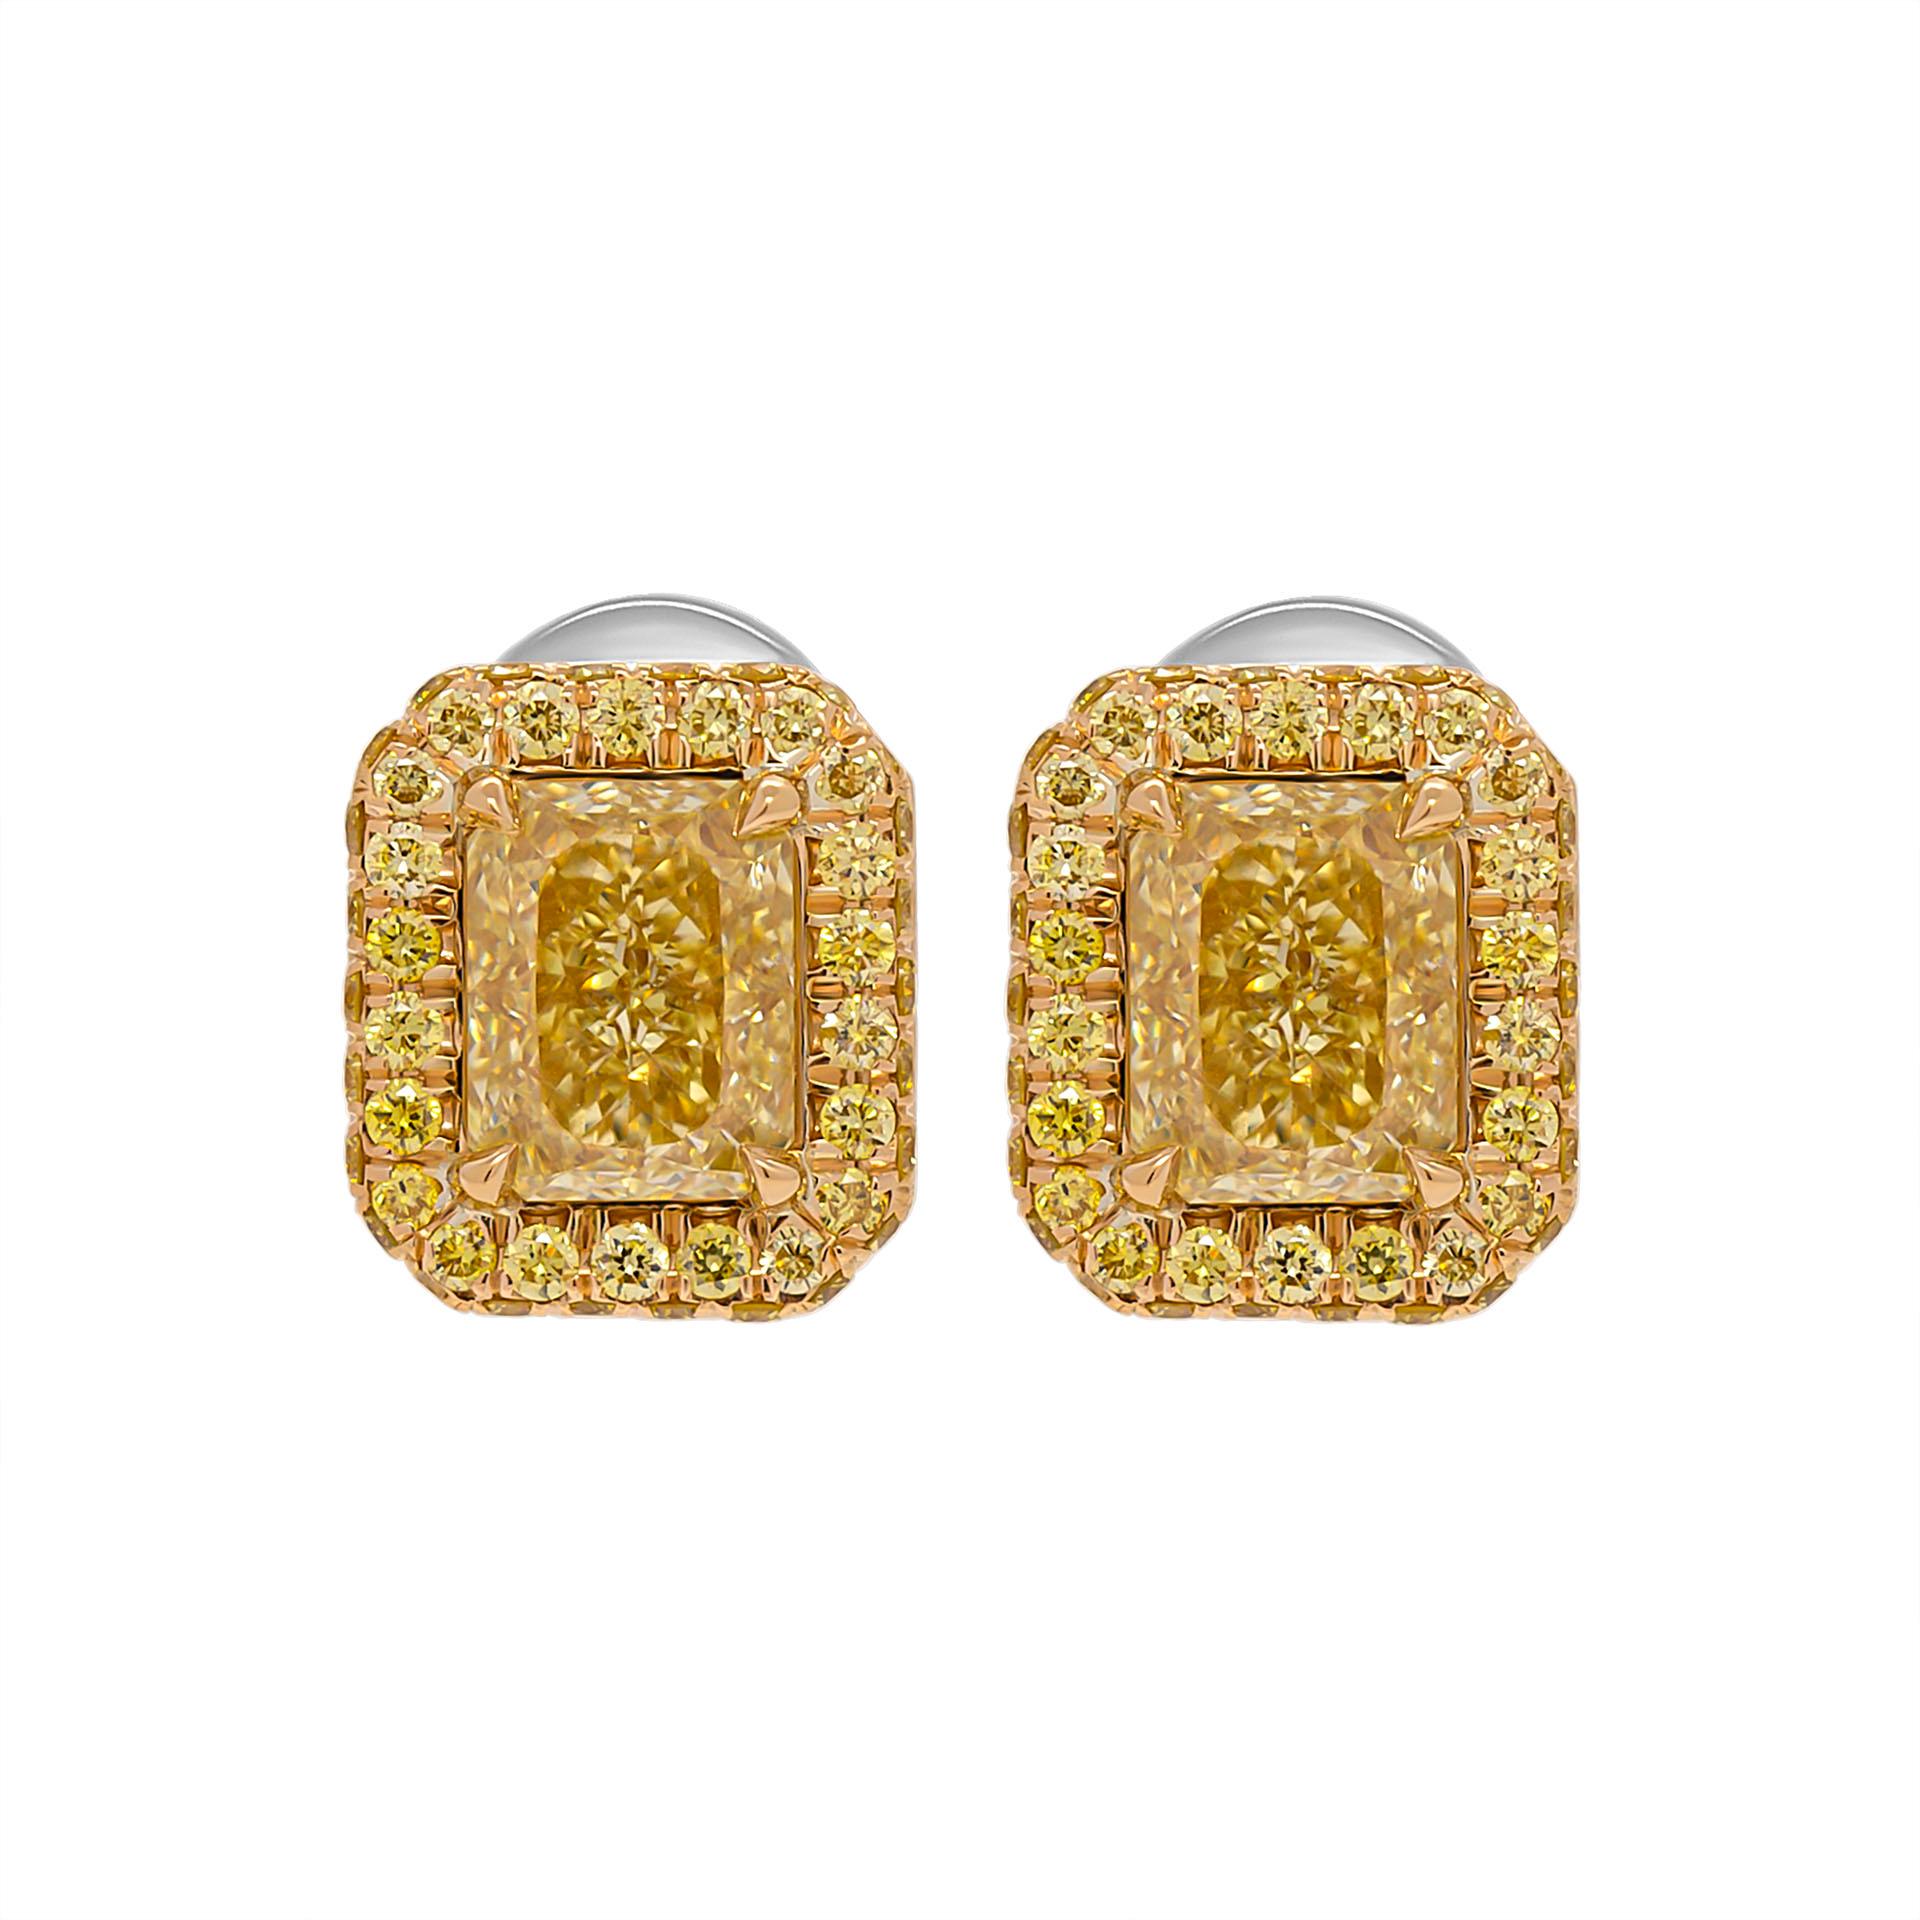 Double edge halo studs with 2 GIA Certified Radiant Diamonds in 18K Yellow Gold 
1.05ct Natural Fancy Intense Yellow Even IF Radiant Shape Diamond GIA#6224285629 
1.00ct Natural Fancy Intense Yellow Even VS2 Radiant Shape Diamond